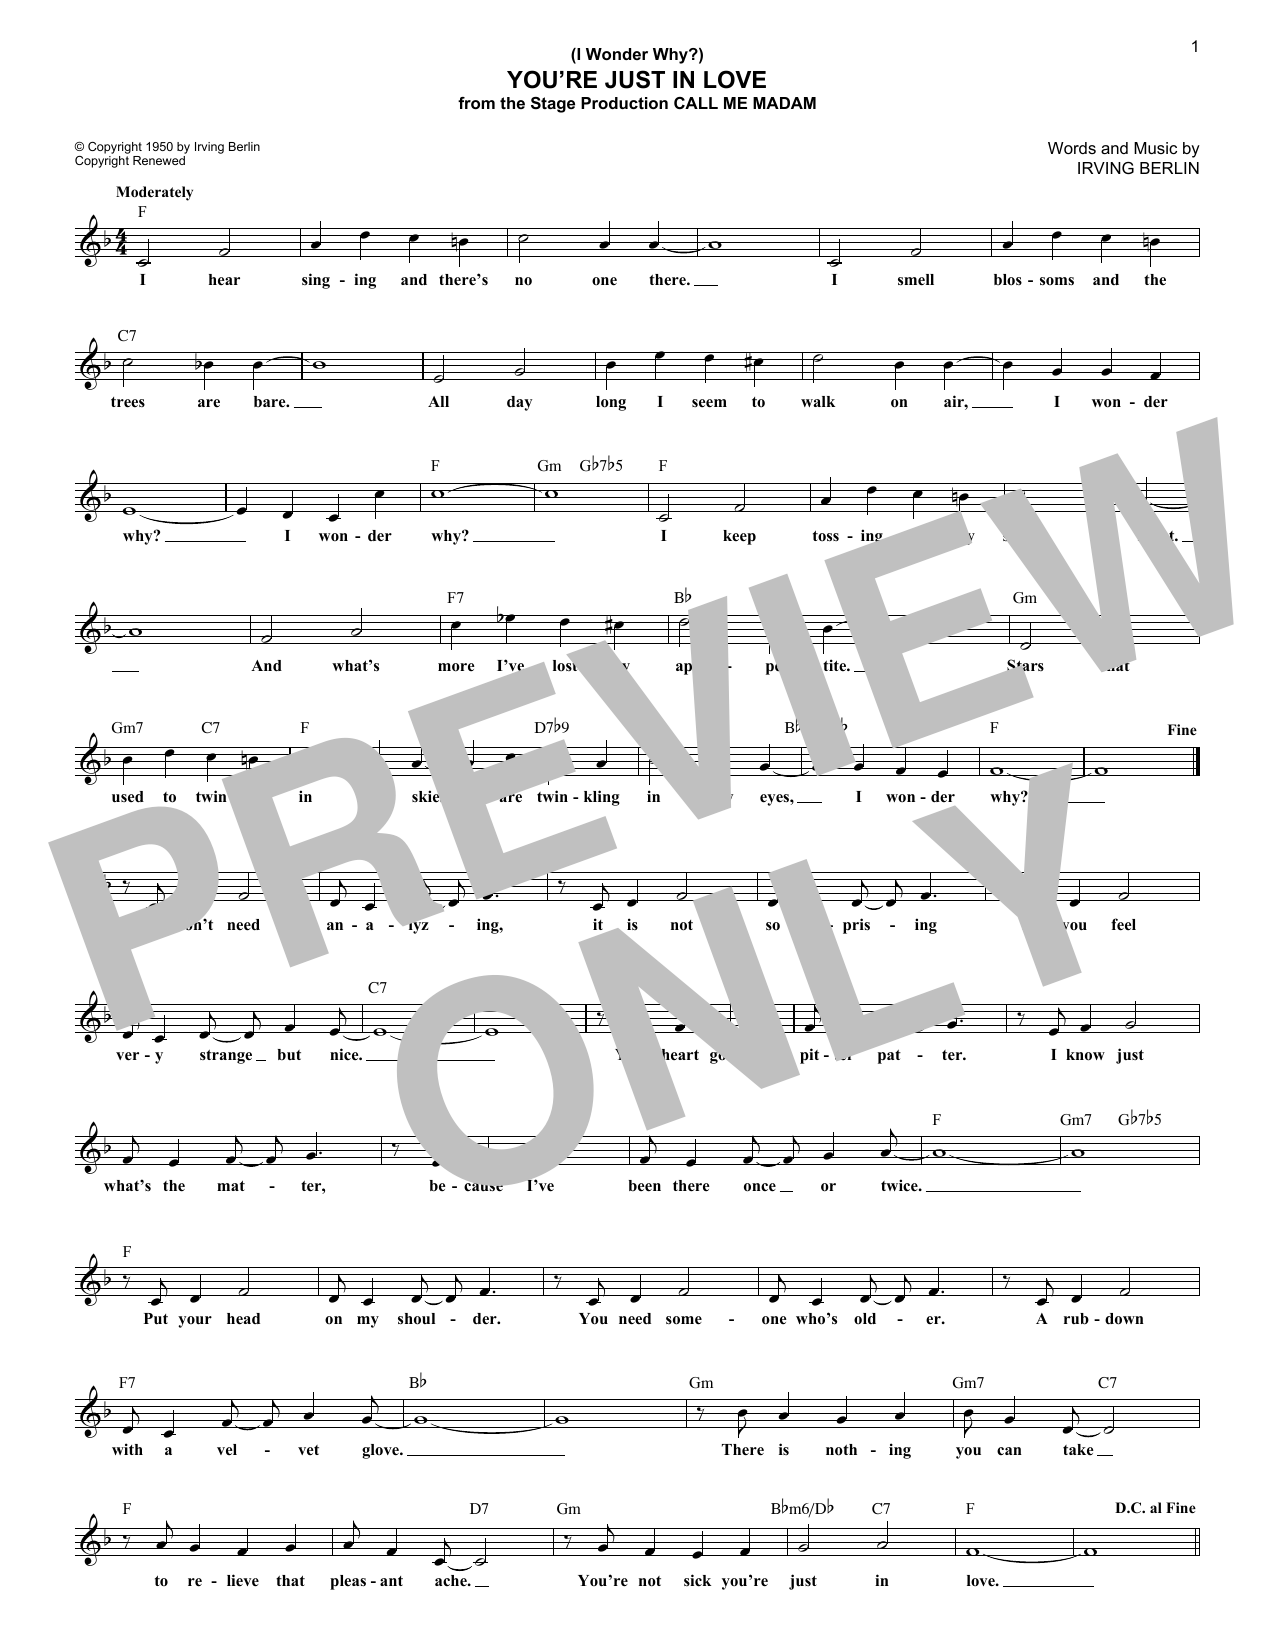 Download Irving Berlin (I Wonder Why?) You're Just In Love Sheet Music